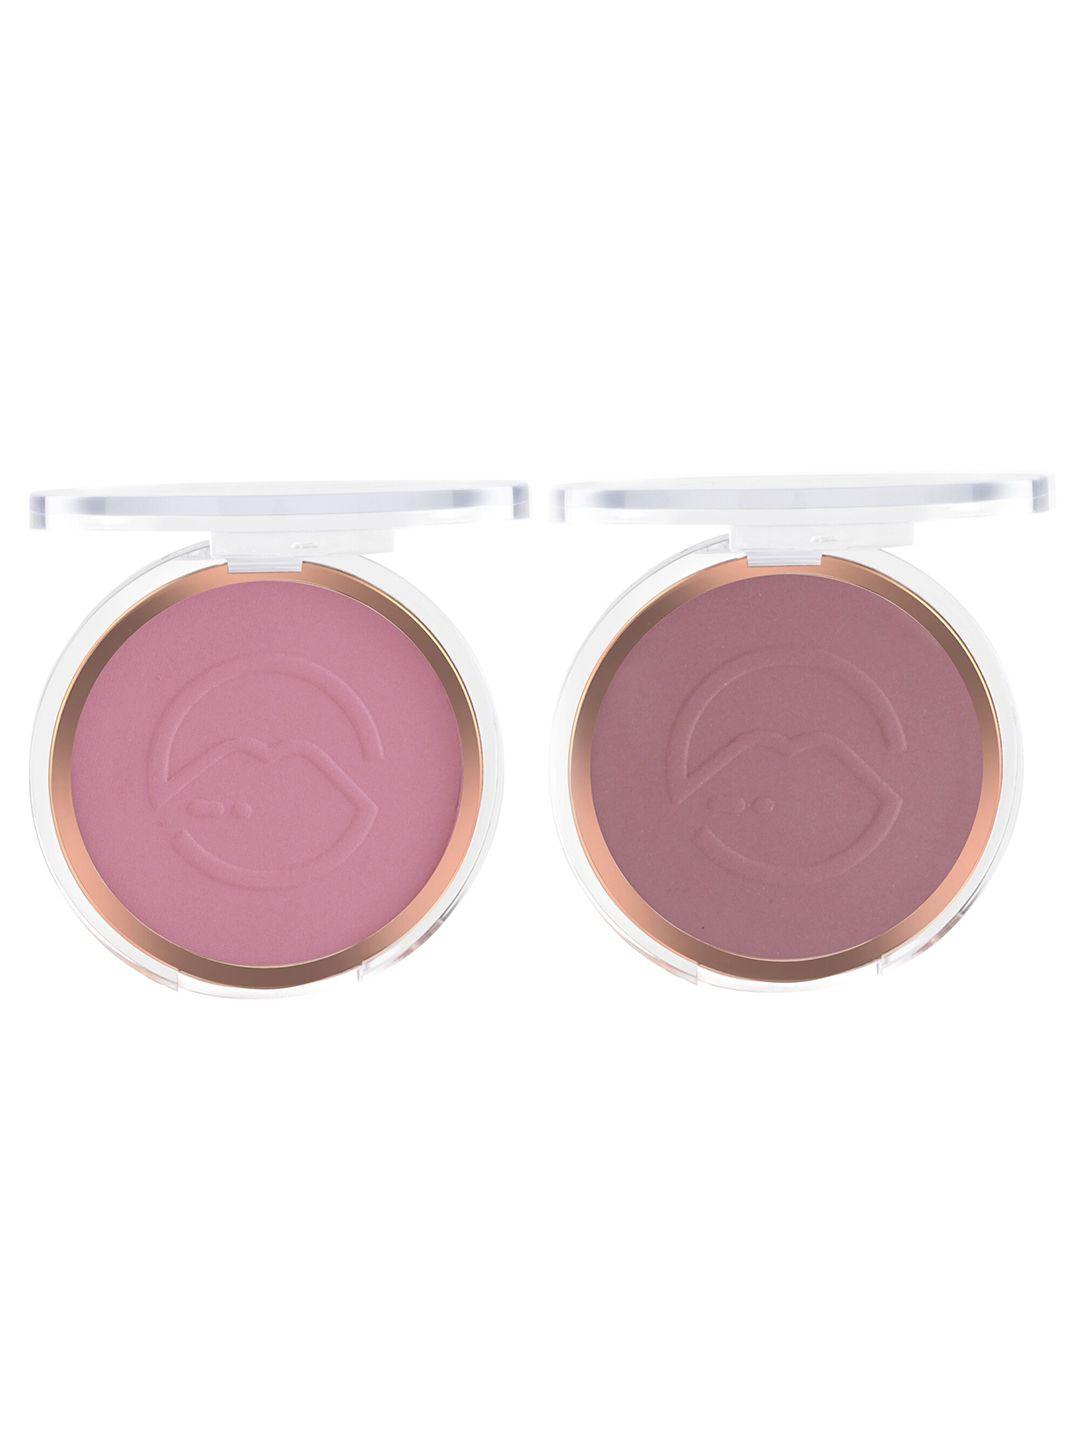 mars set of 2 flush of love highly pigmented matte face blusher - shade 03 & 05